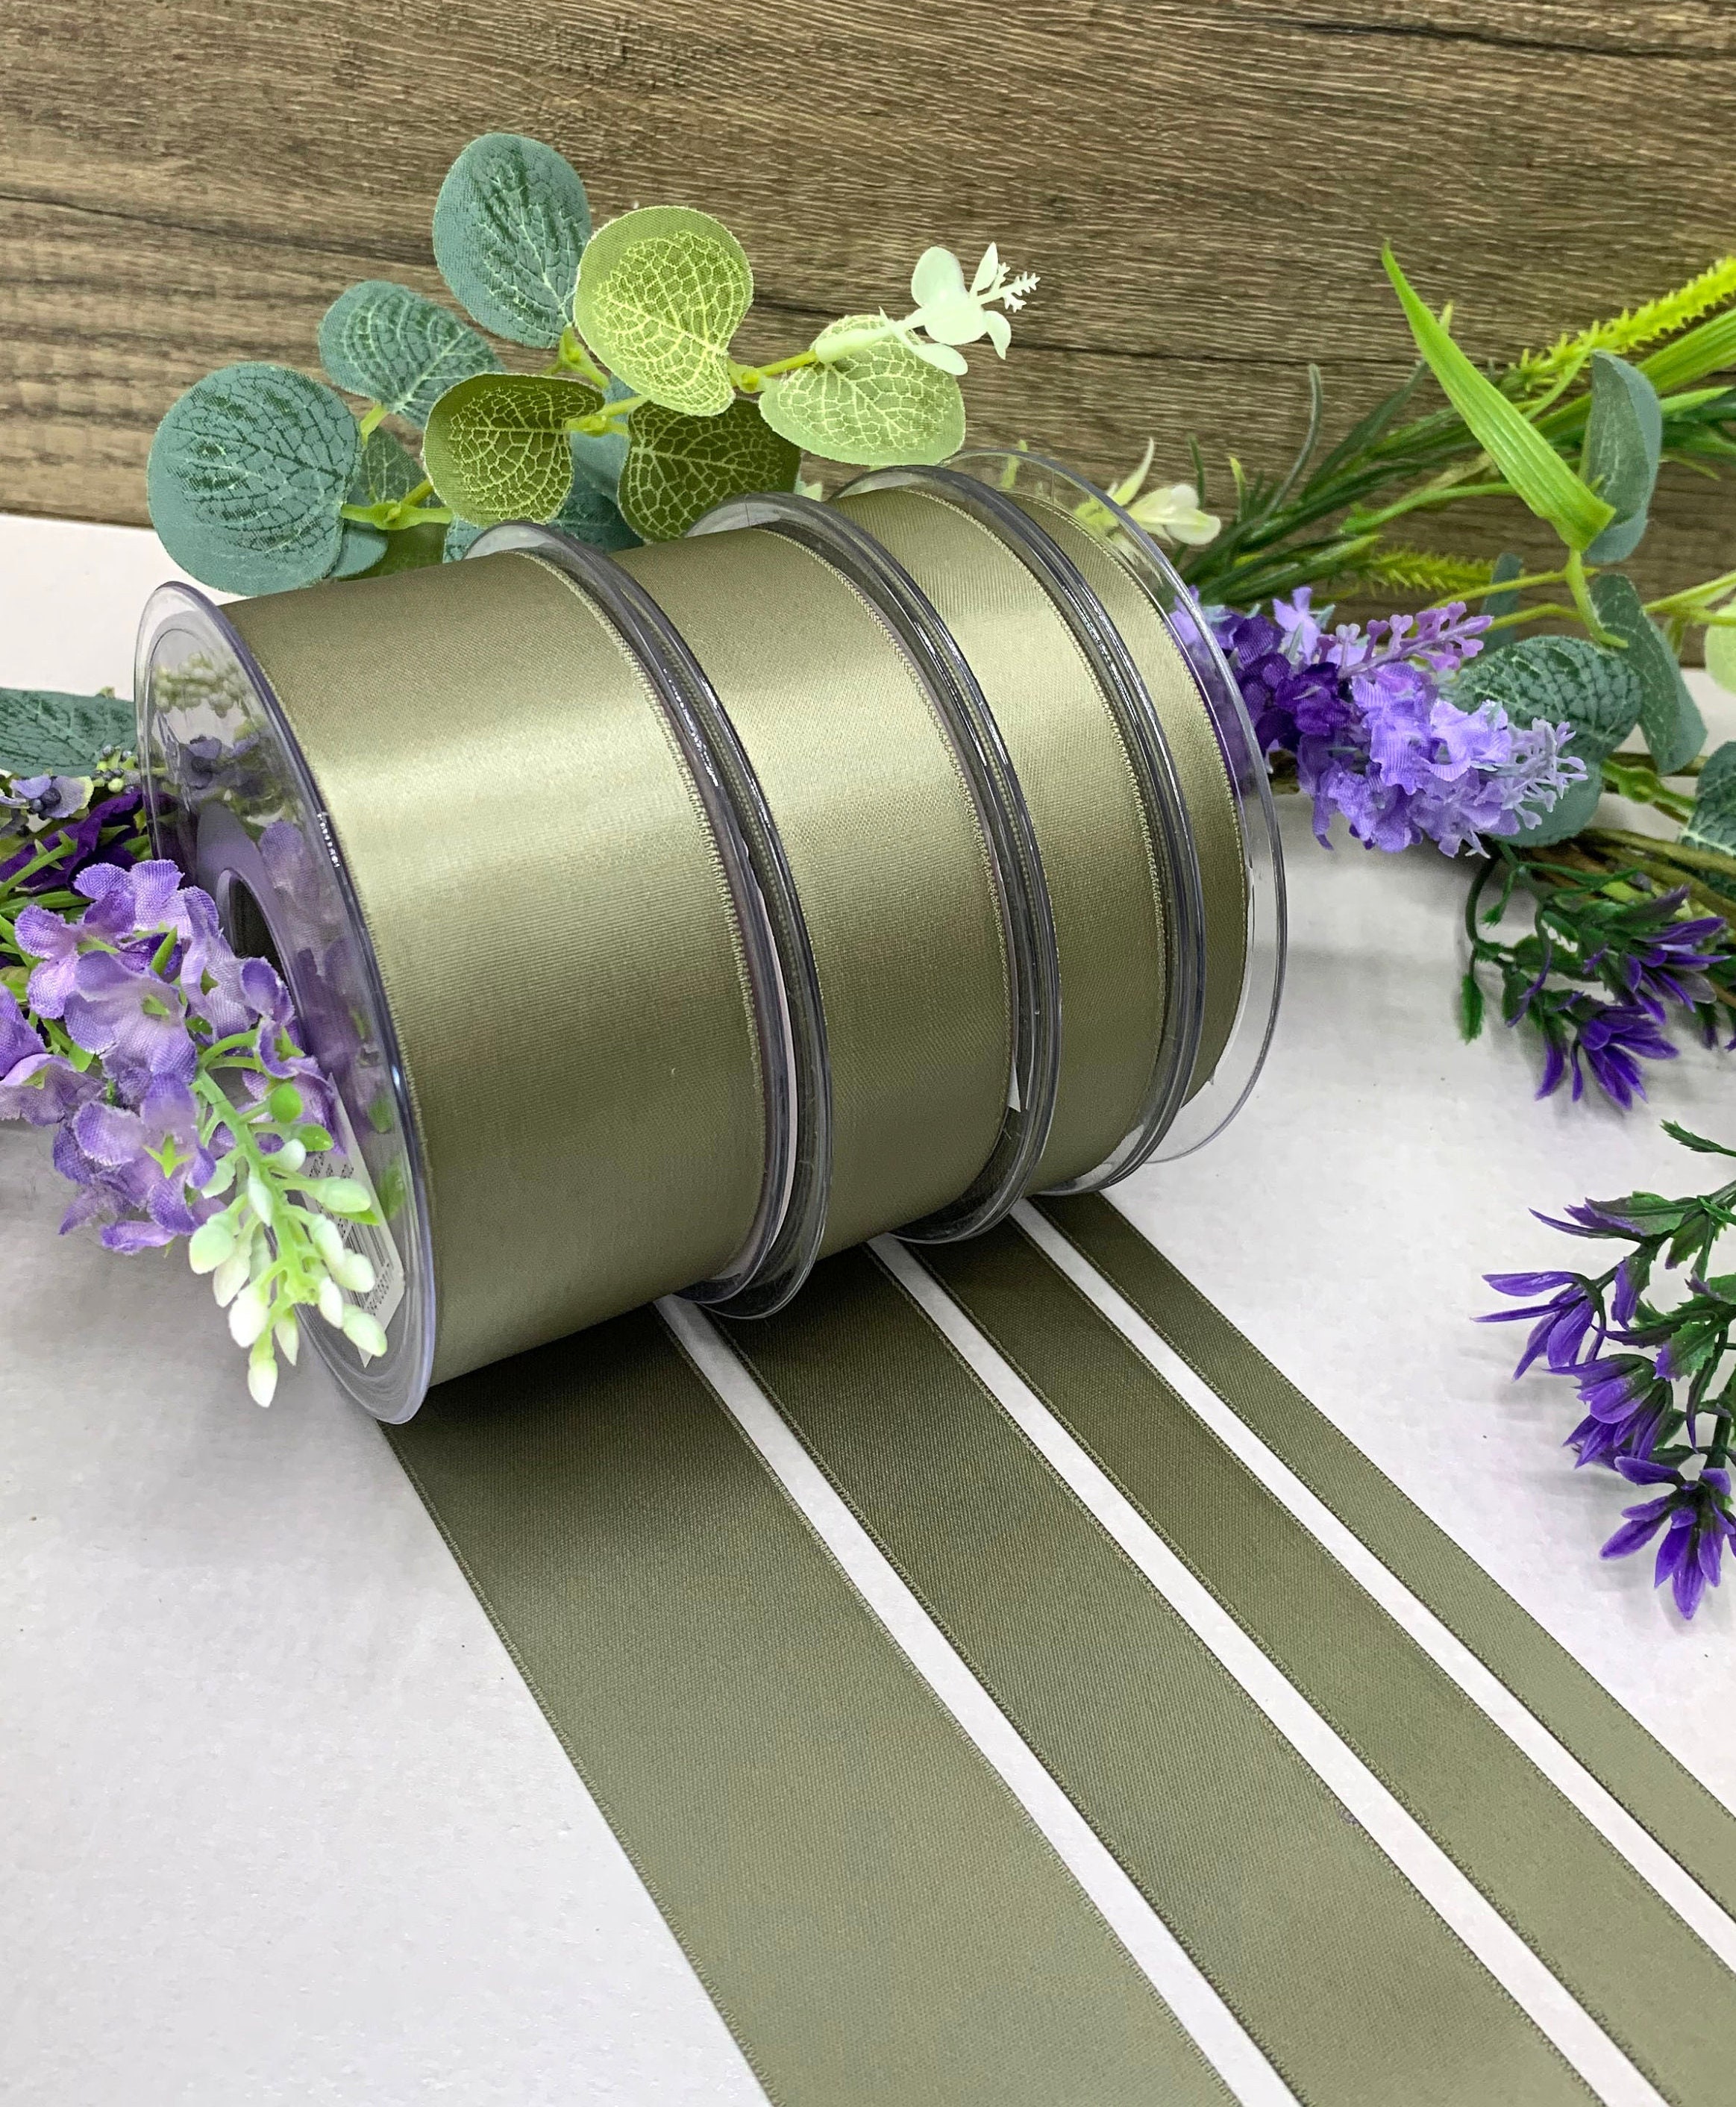 HUIHUANG Sage Green Ribbon 2 inch Double Face Green Satin Ribbon for Flower  Bouquet Wrap, Dusty Sage Silk Satin Ribbon for Wedding Invitations, Gift